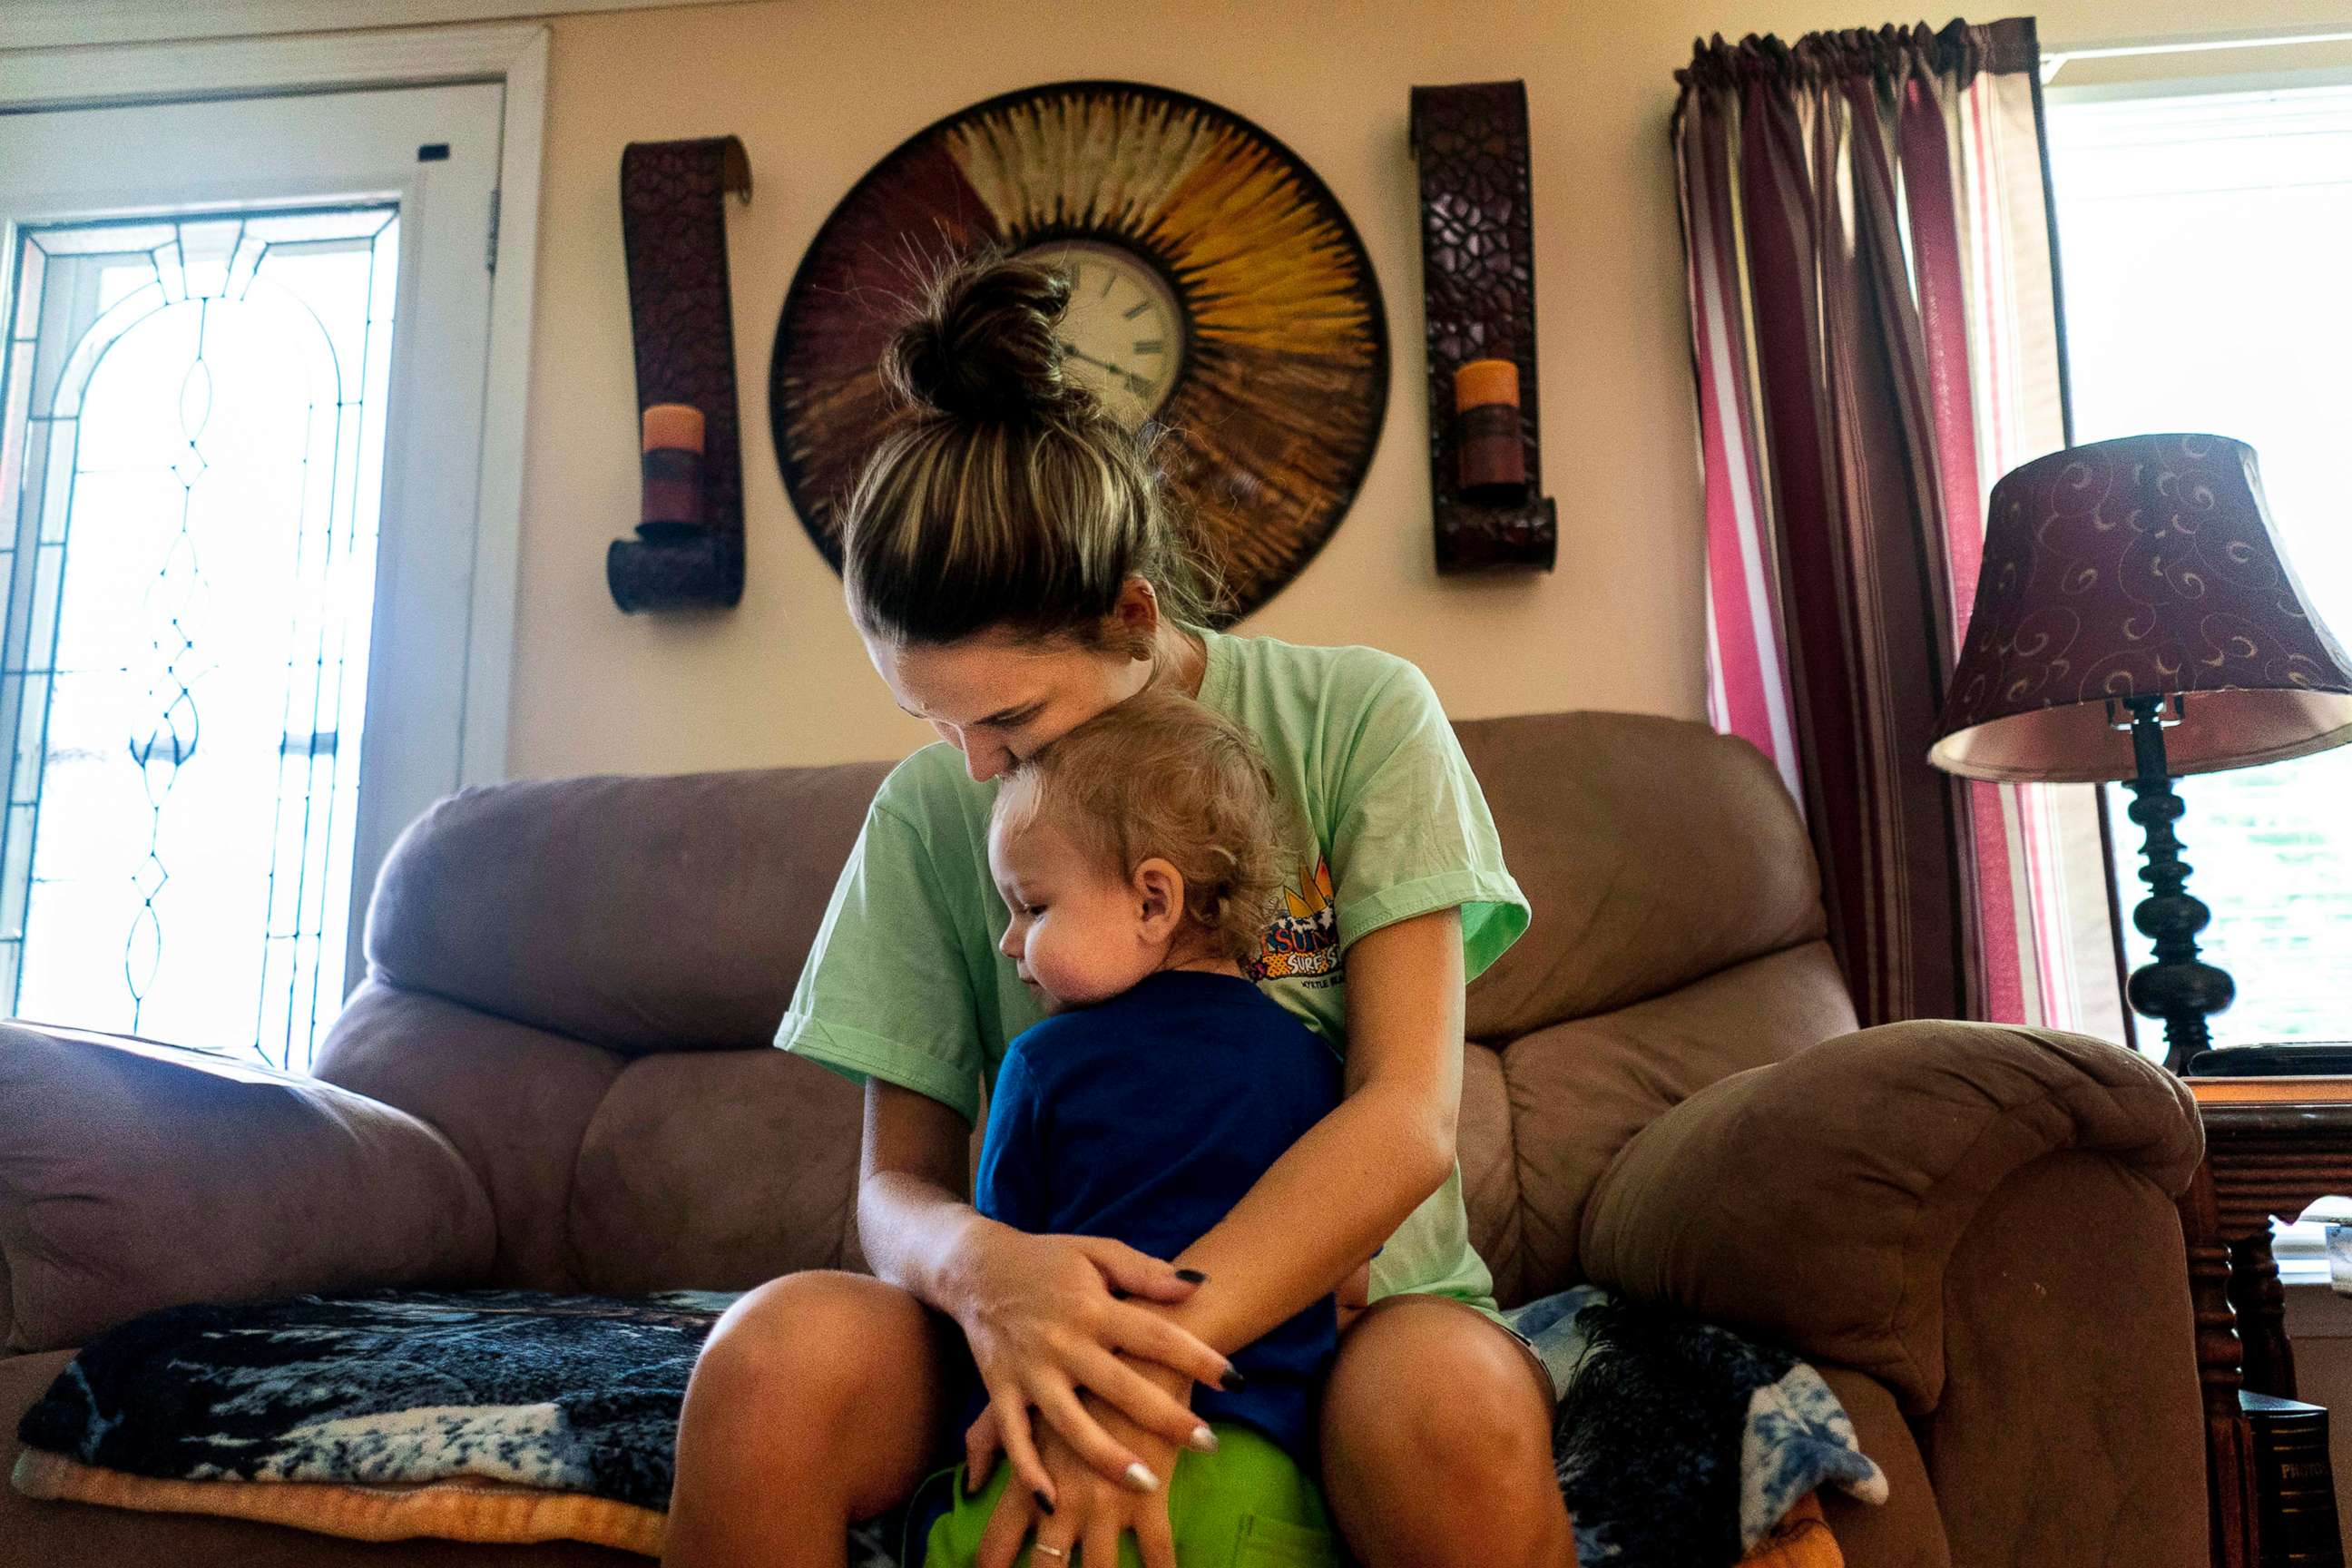 PHOTO: A mother recovering from an opioid addiction holds her son at their home in a remote area where prescription opioids addiction has greatly affected communities like Big Stone Gap, Va., July 22, 2019.